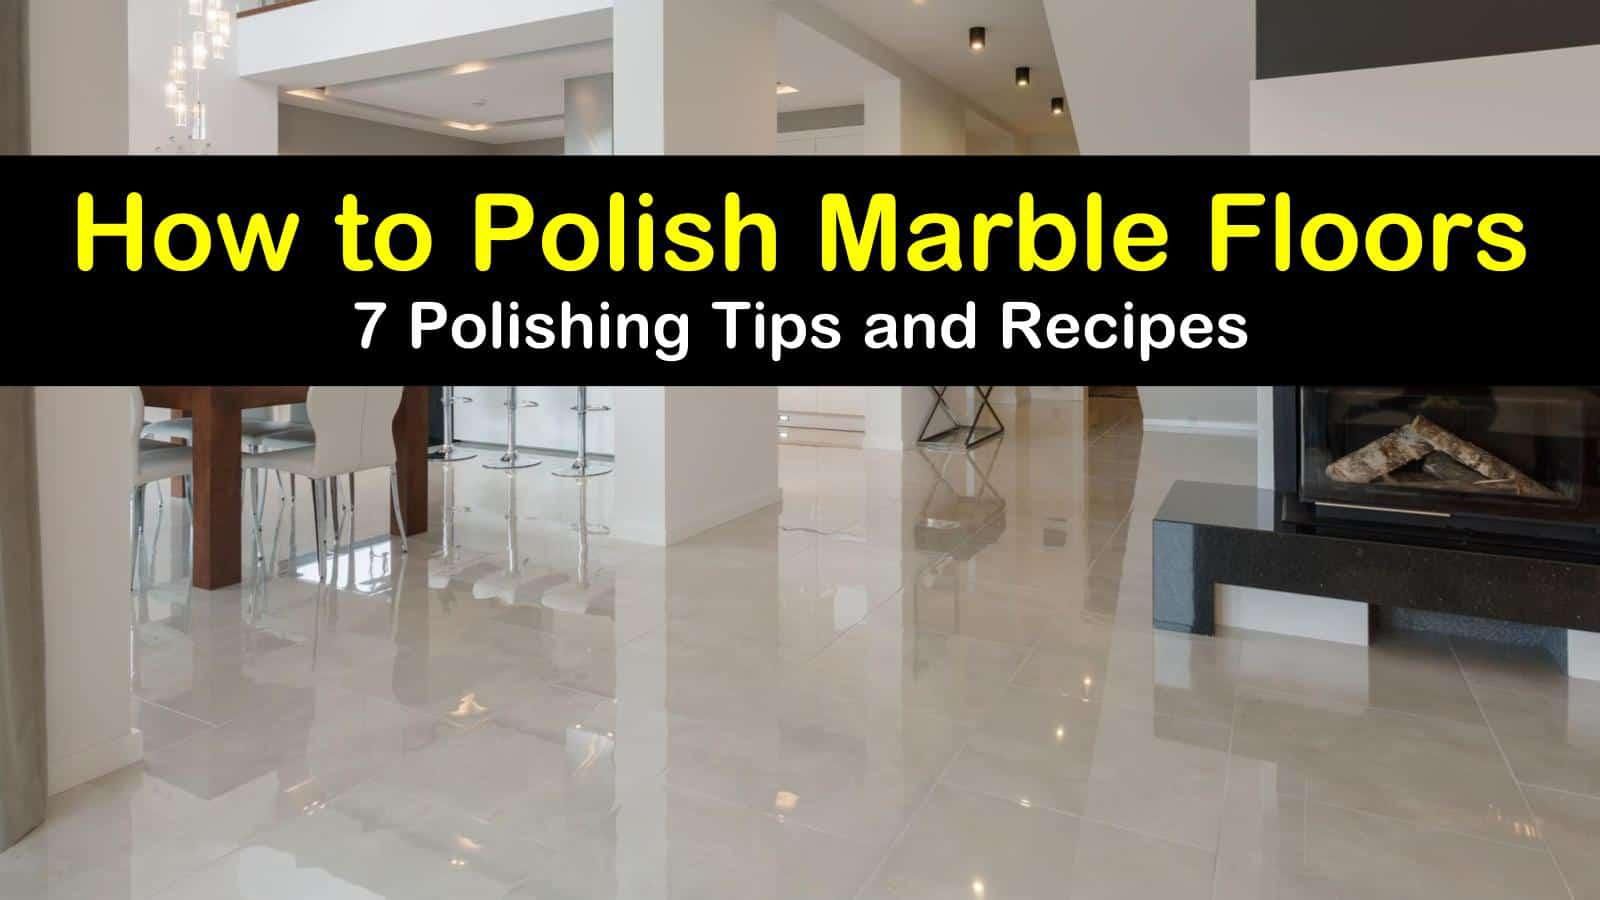 A method for polishing marble counters that works